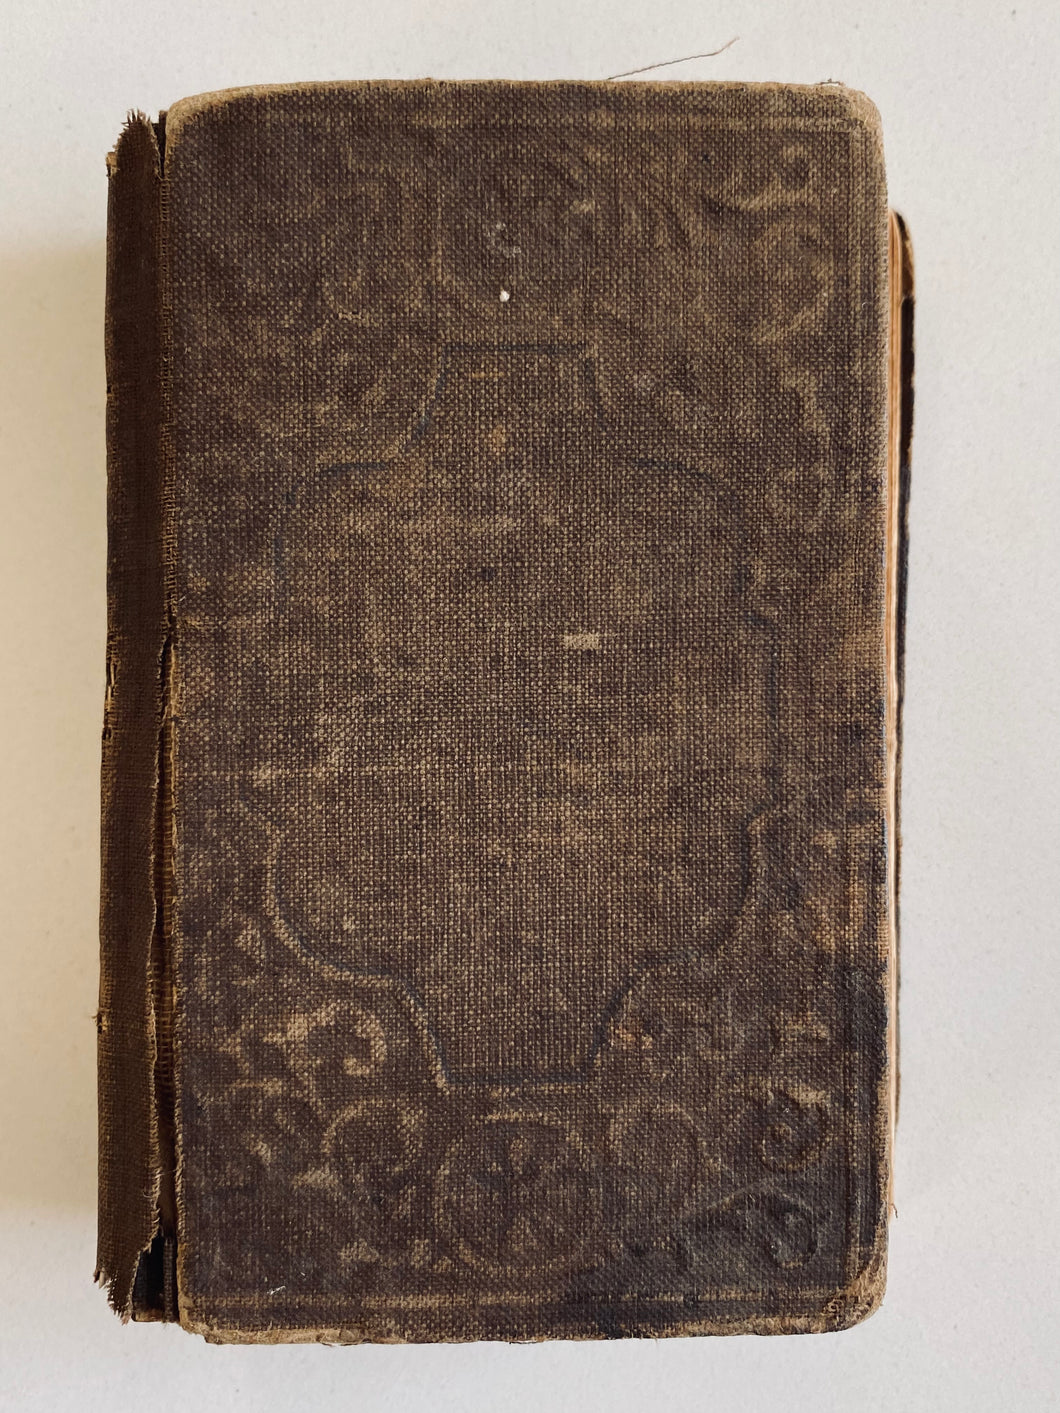 1863 CIVIL WAR. American Bible Society - Soldier Issue Pocket Bible